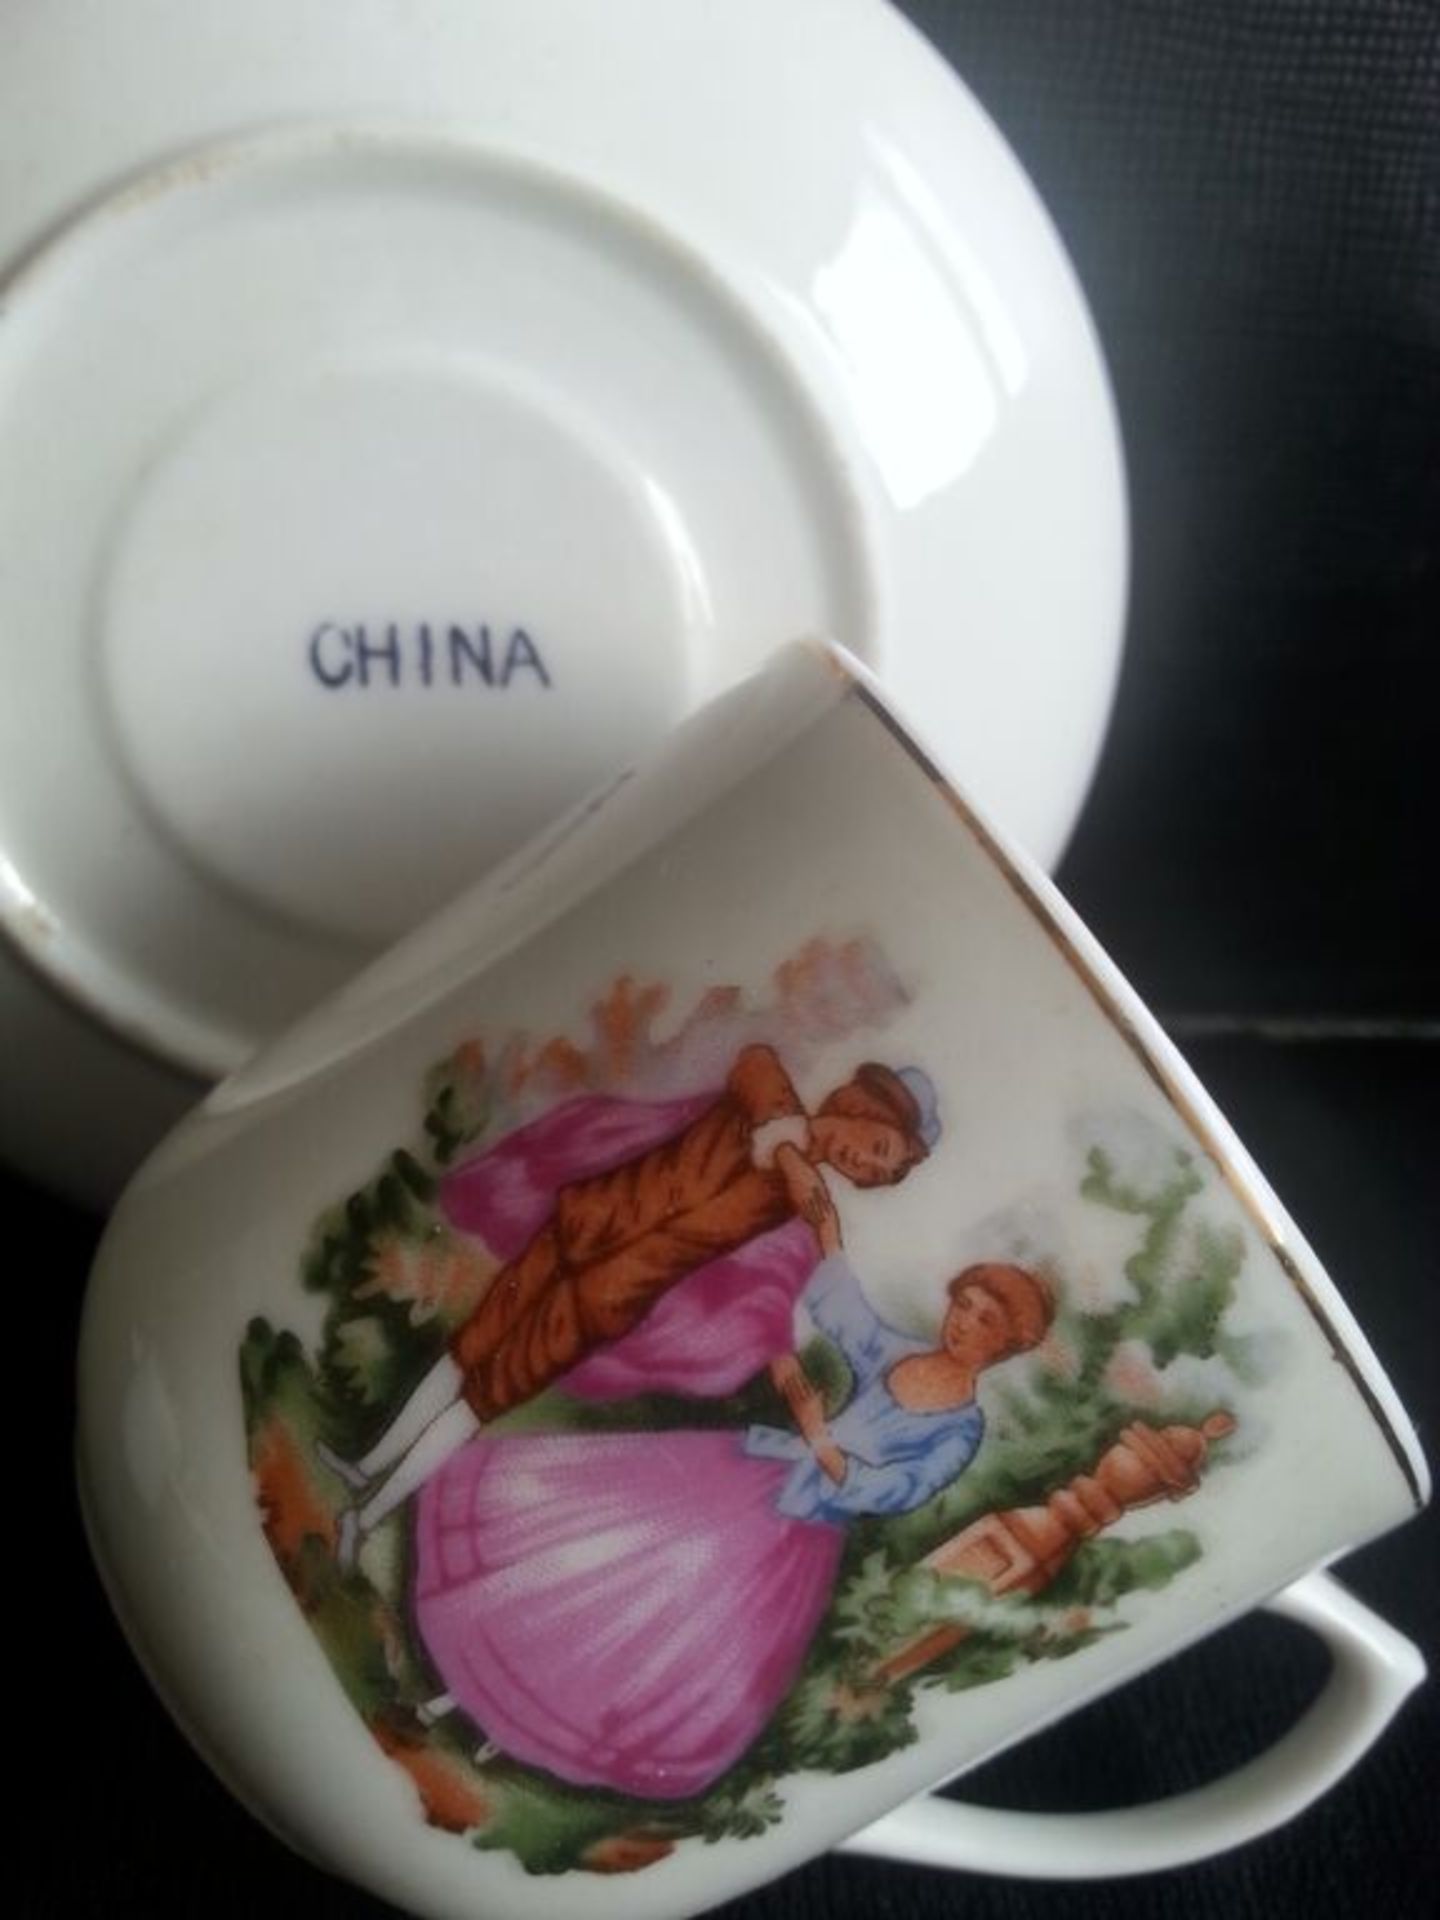 Vintage Chinese Export Espresso Coffee Set, Complete in Original Box - 5 Saucers and 5 Plates with - Image 3 of 4